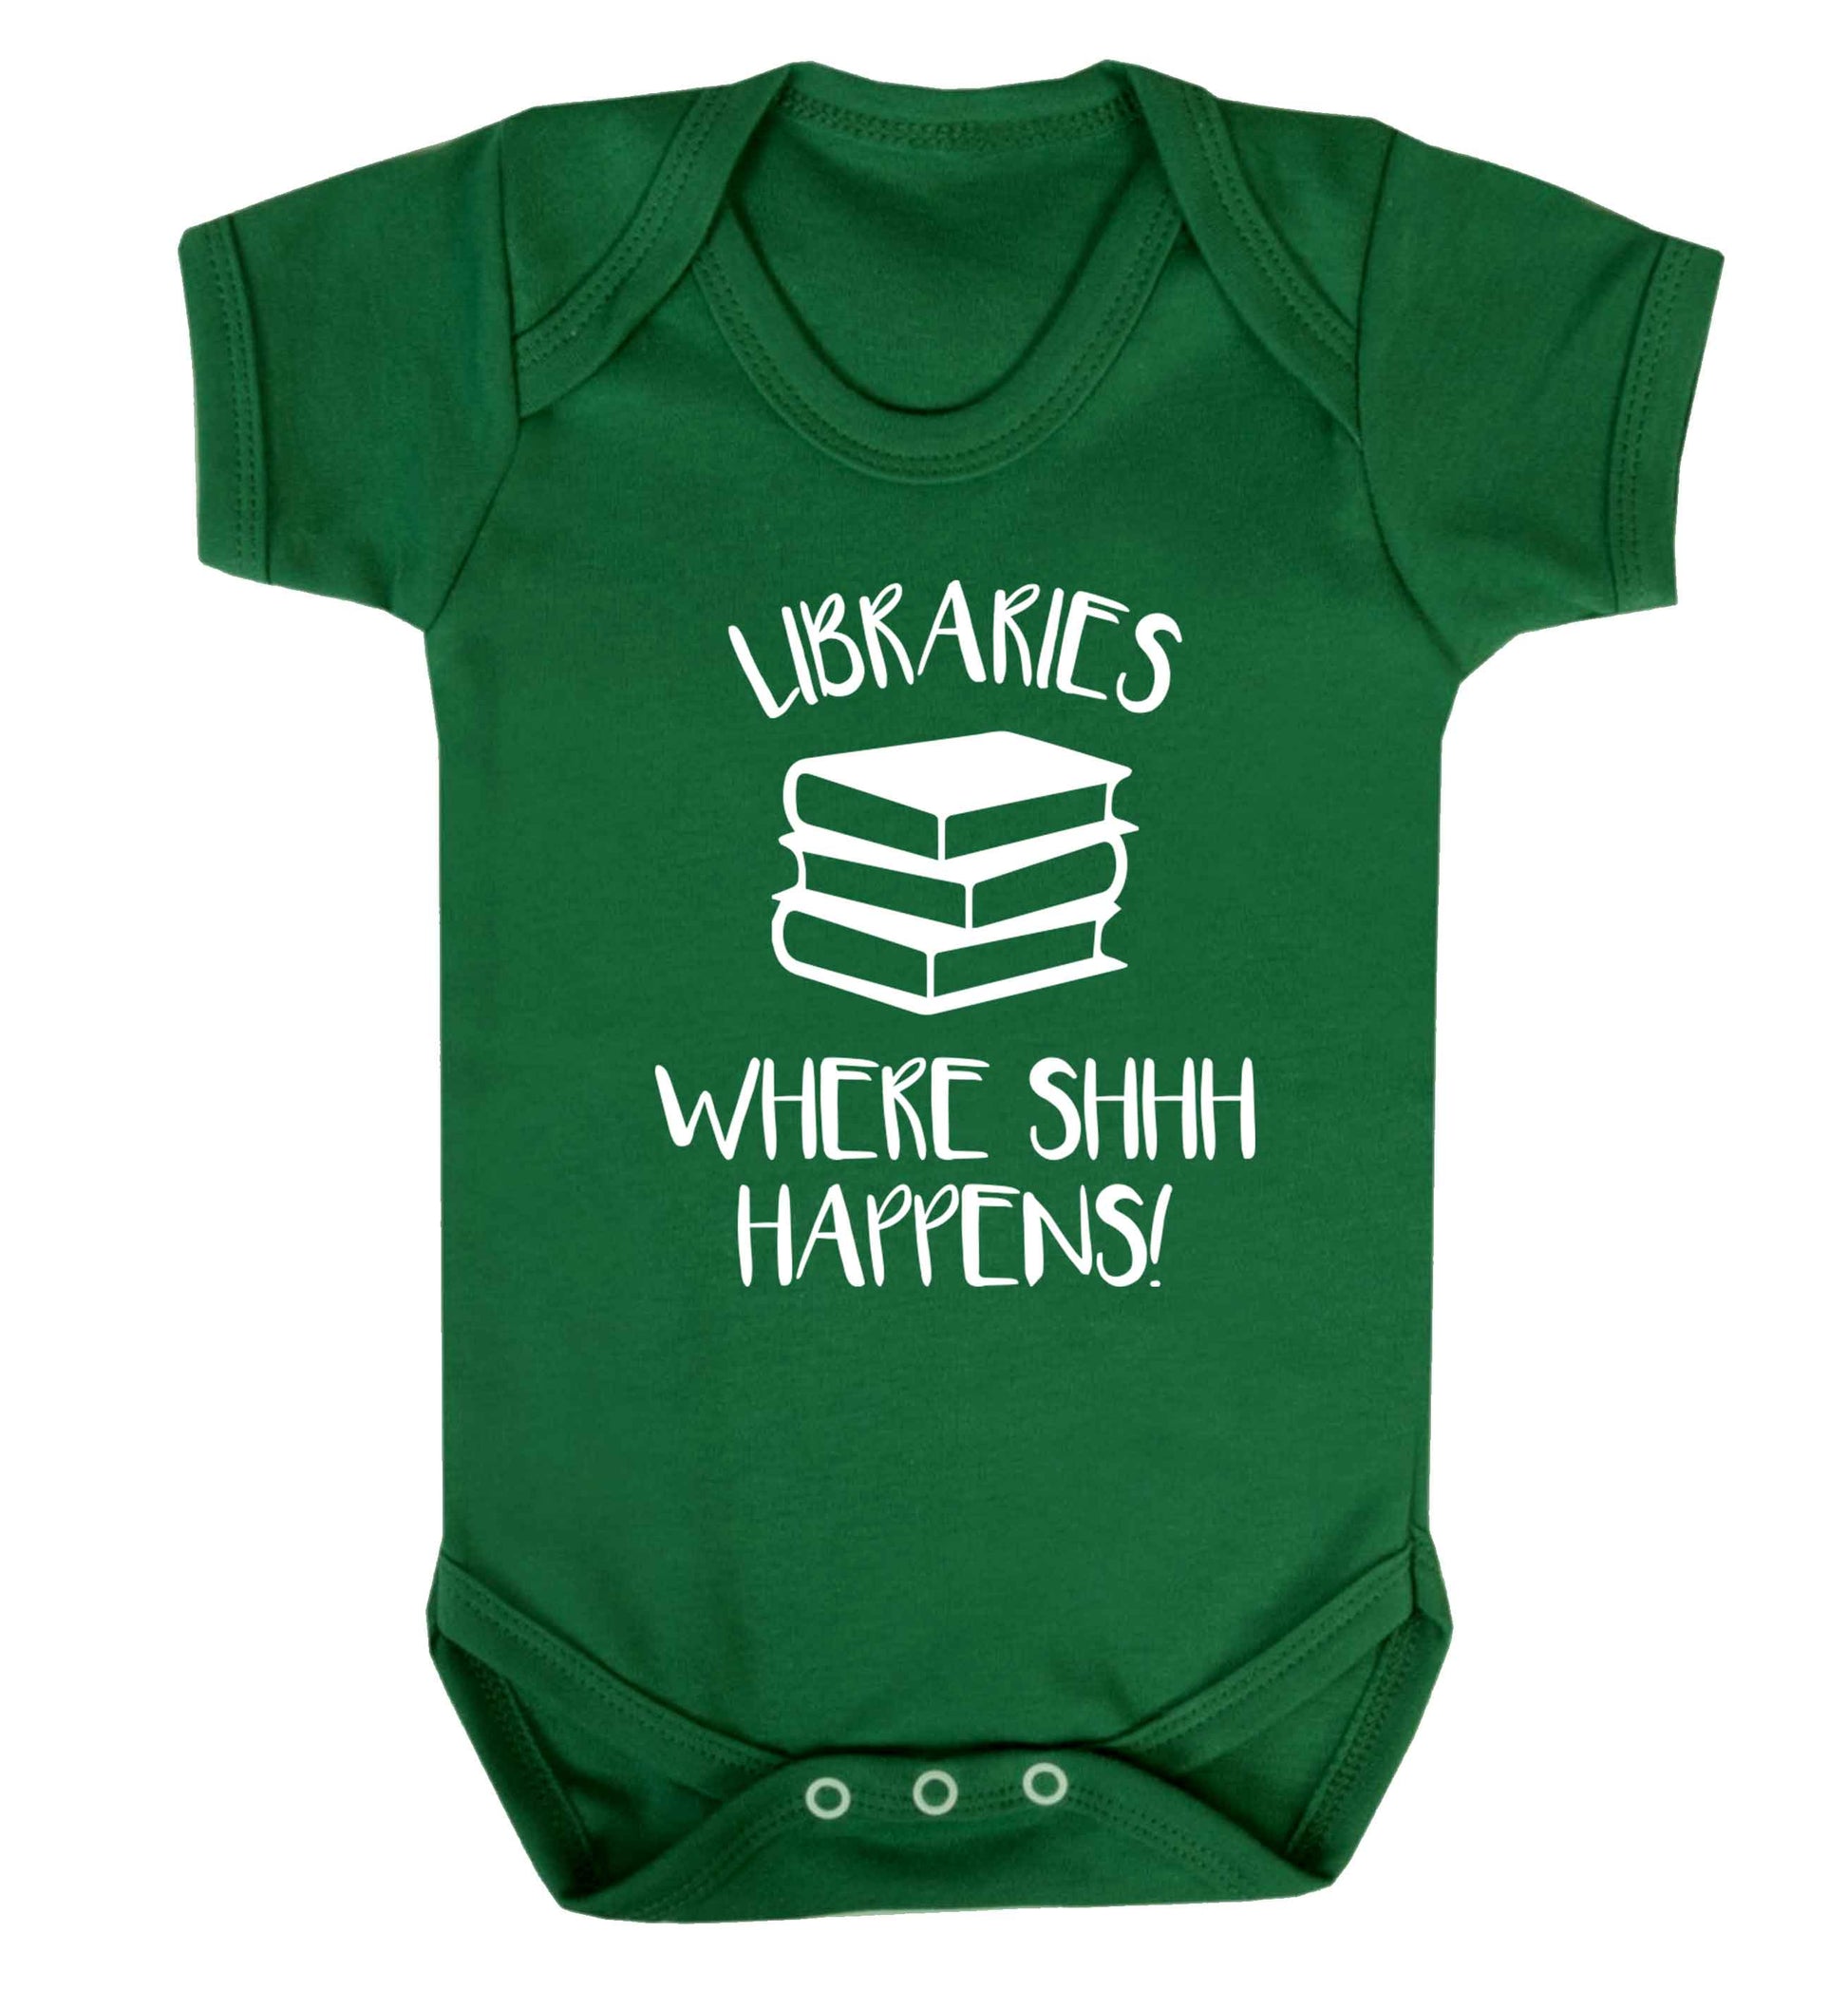 Libraries where shh happens! Baby Vest green 18-24 months